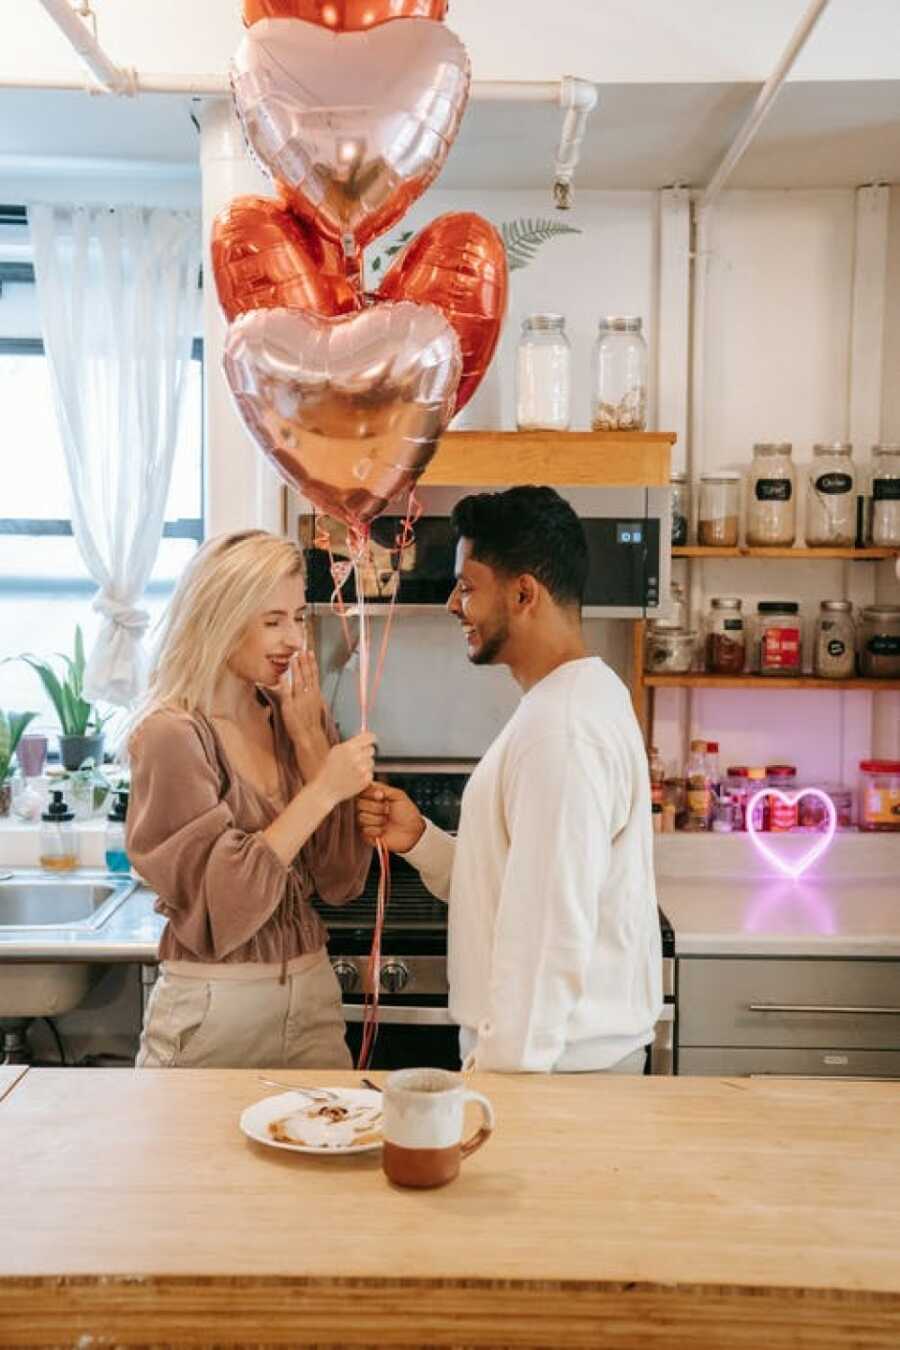 man giving his partner balloons to keep spark alive